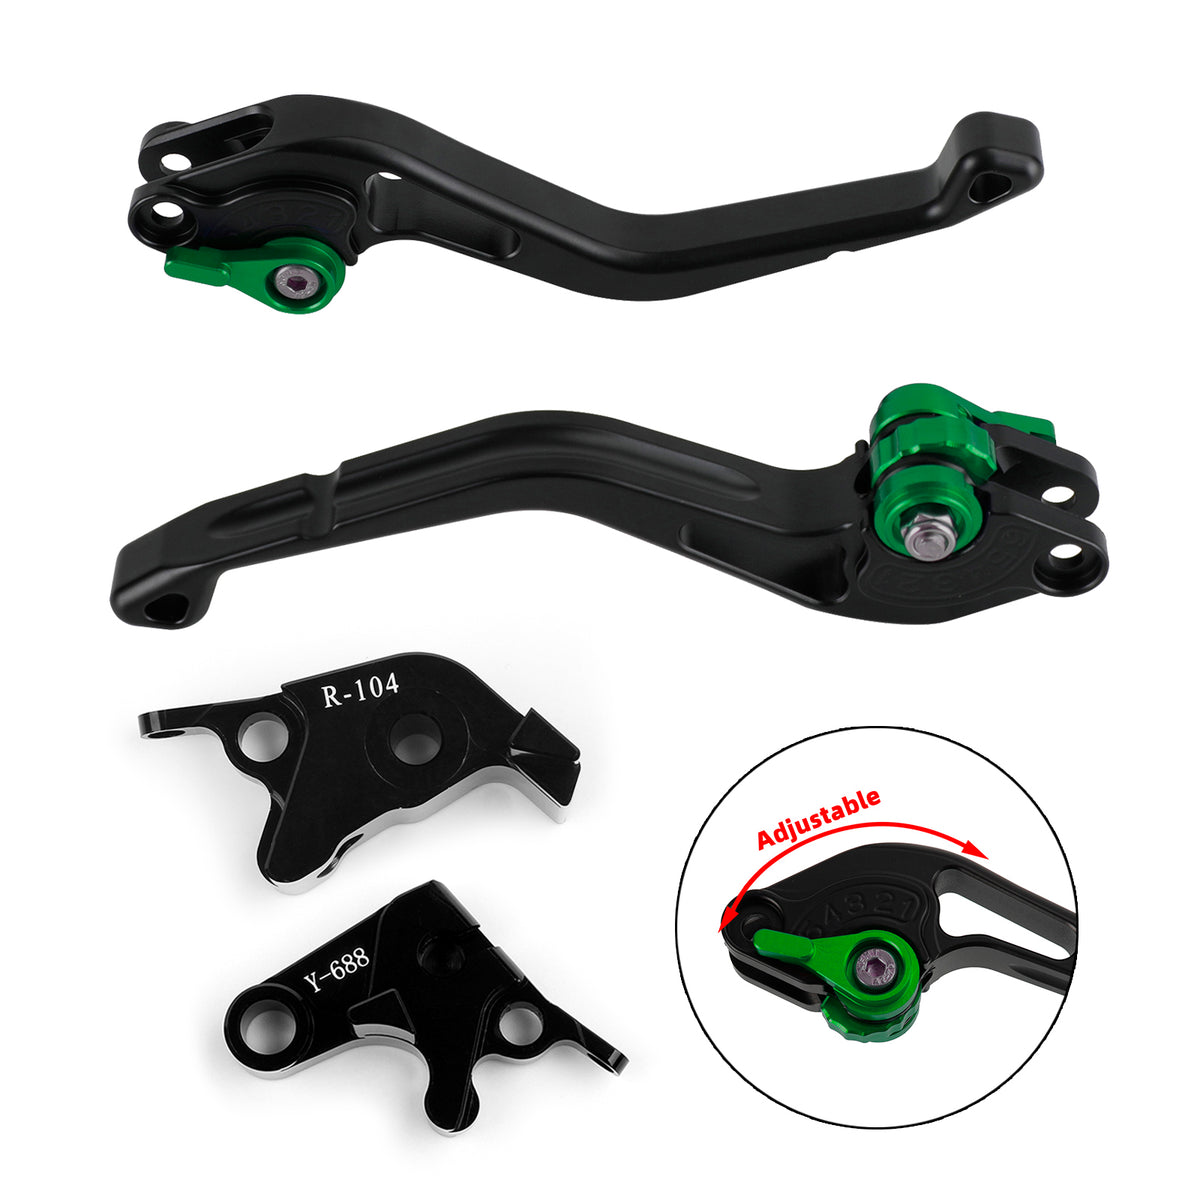 NEW Short Clutch Brake Lever fit for Yamaha YZF R1 R6 R6S CA/EU VERSION